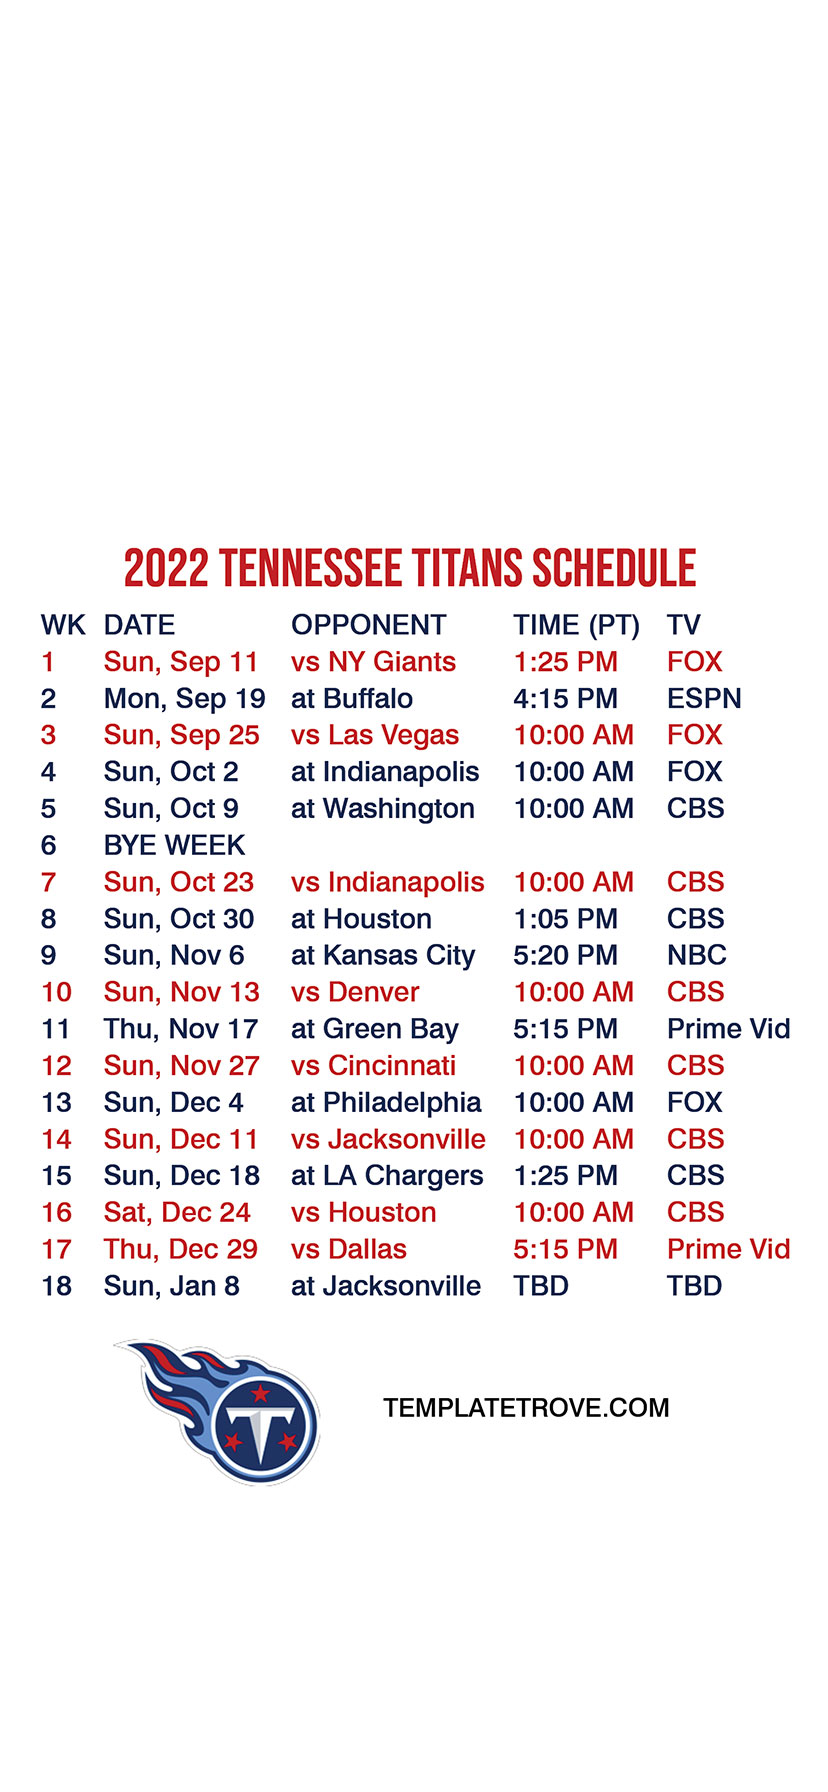 2022-2023 Tennessee Titans Lock Screen Schedule for iPhone 6-7-8 Plus